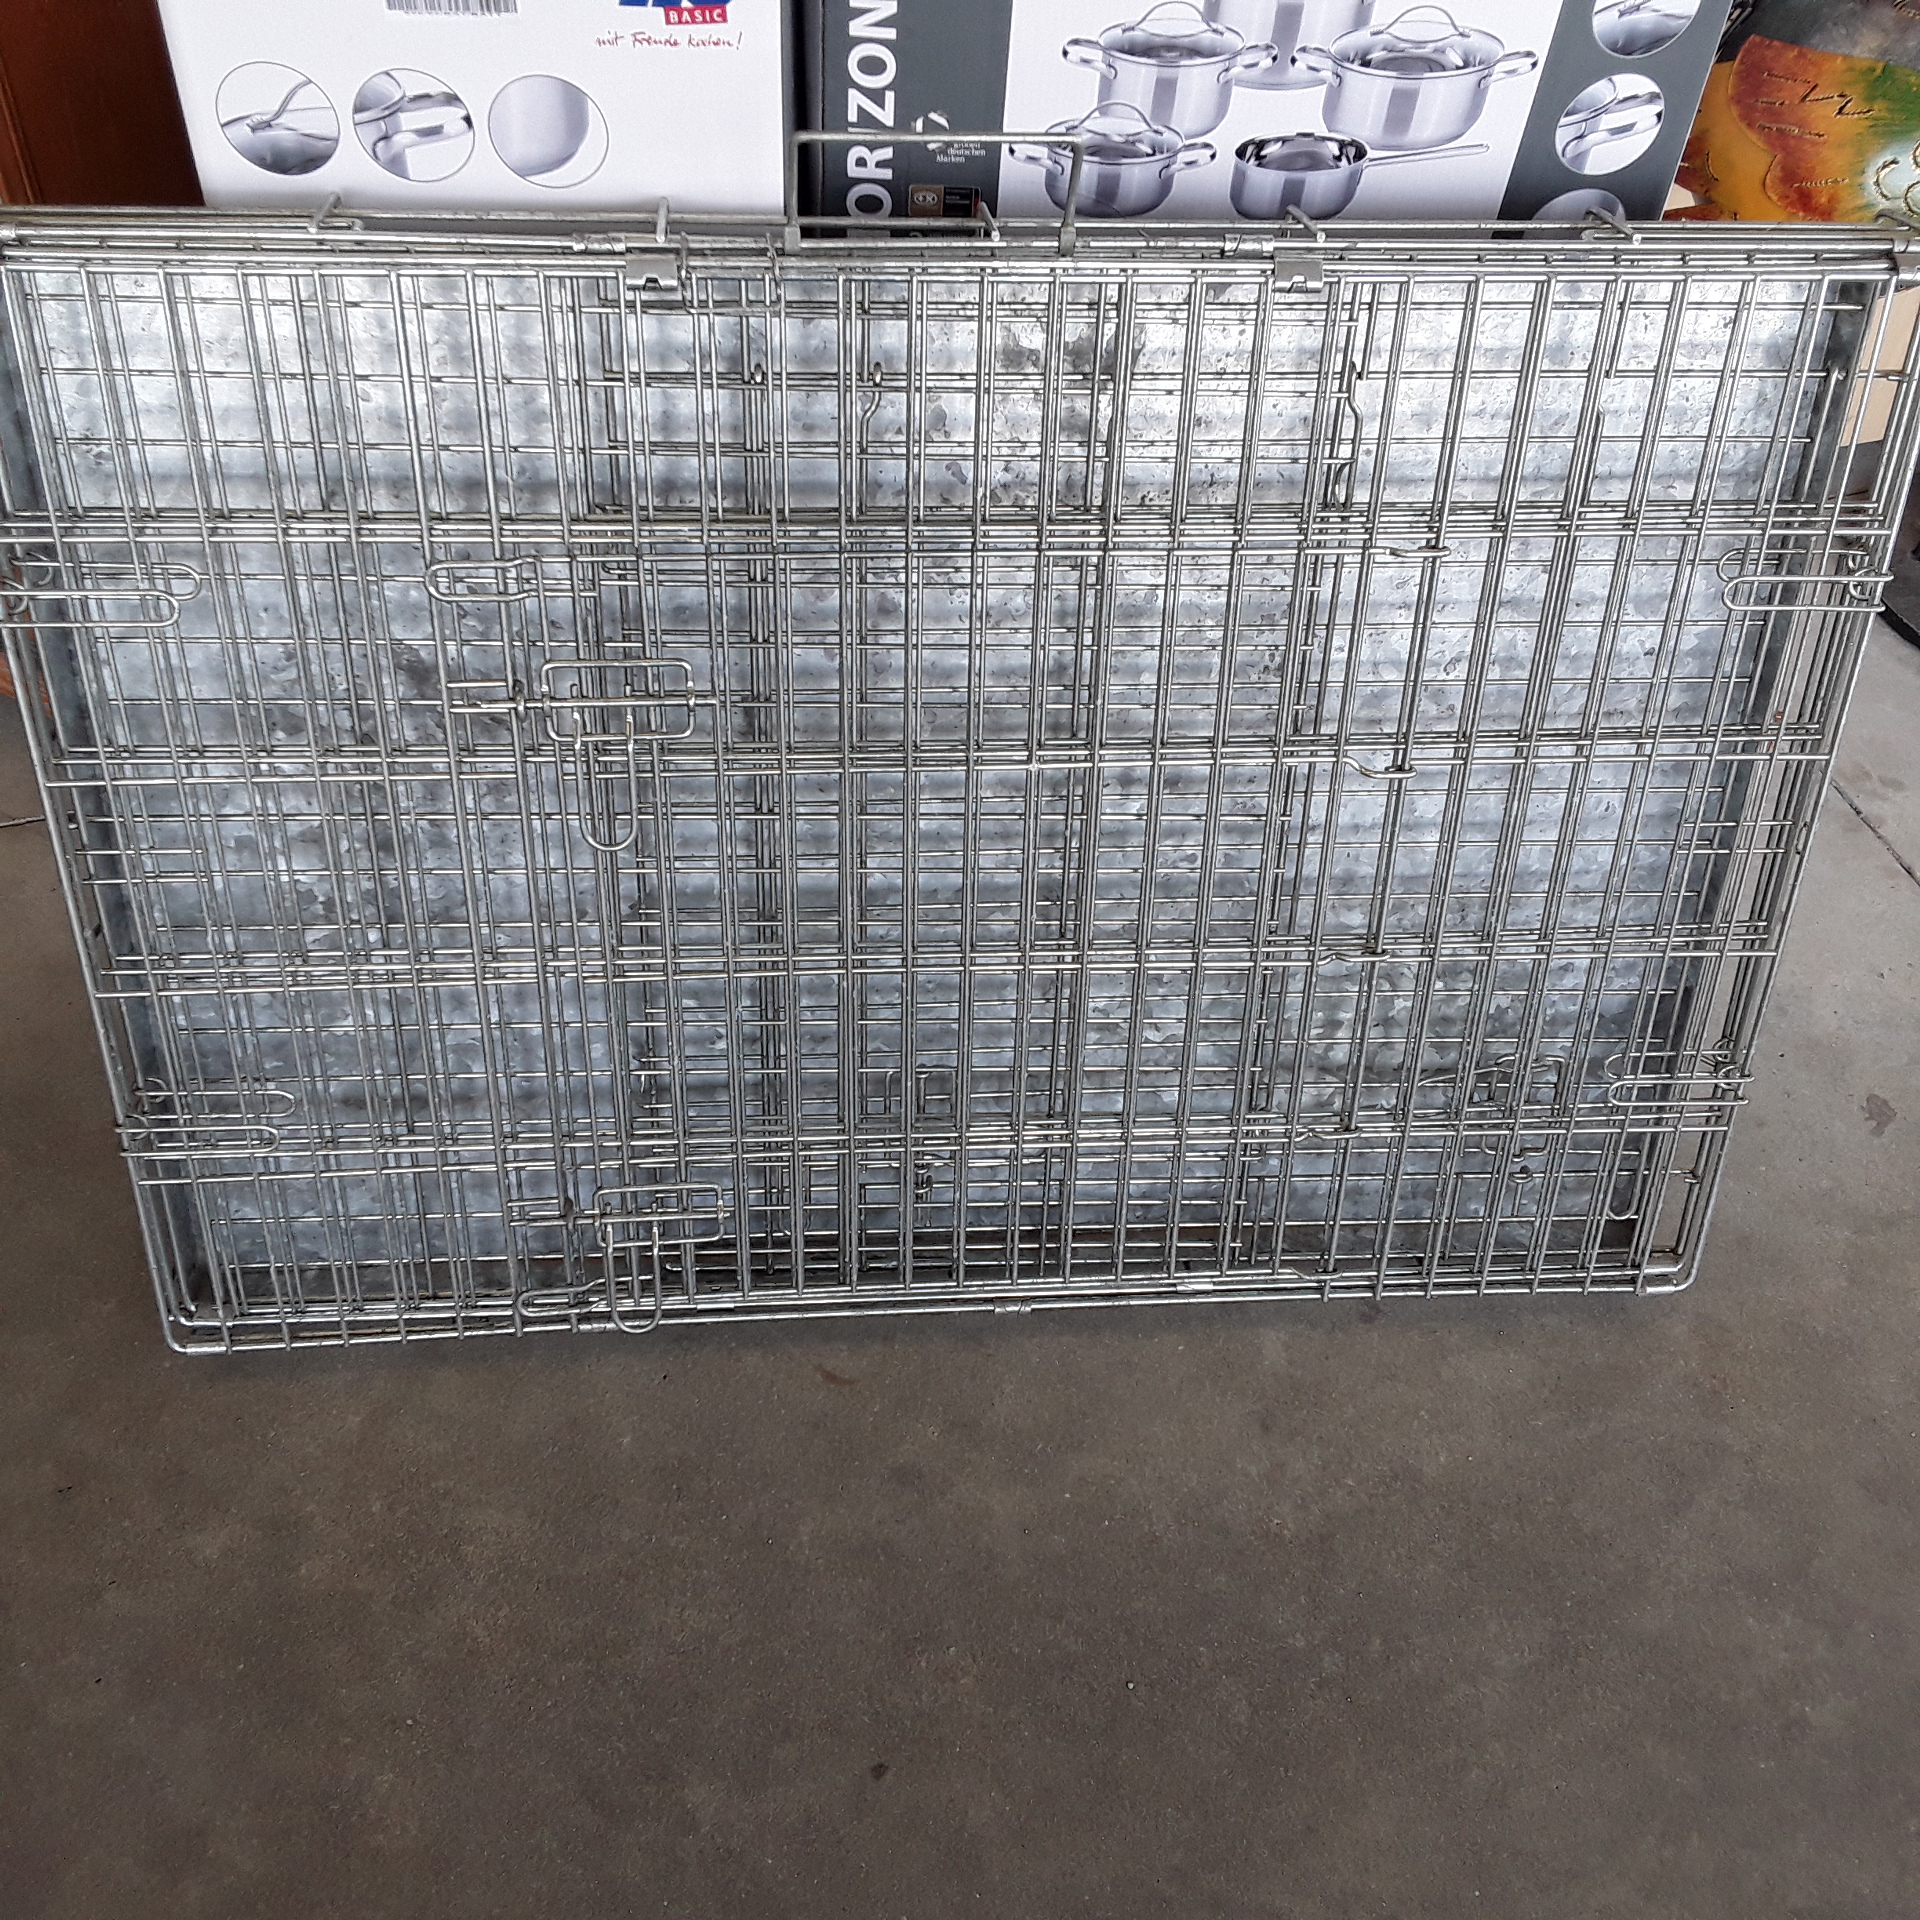 <p>Cage pour animaux<br />90 x 60 cm<br />40,00 € T.T.C<br /><a href="/Article/118752?type=depose" style="color:white;" target="_blank">Lien vers l&#39;article</a></p>